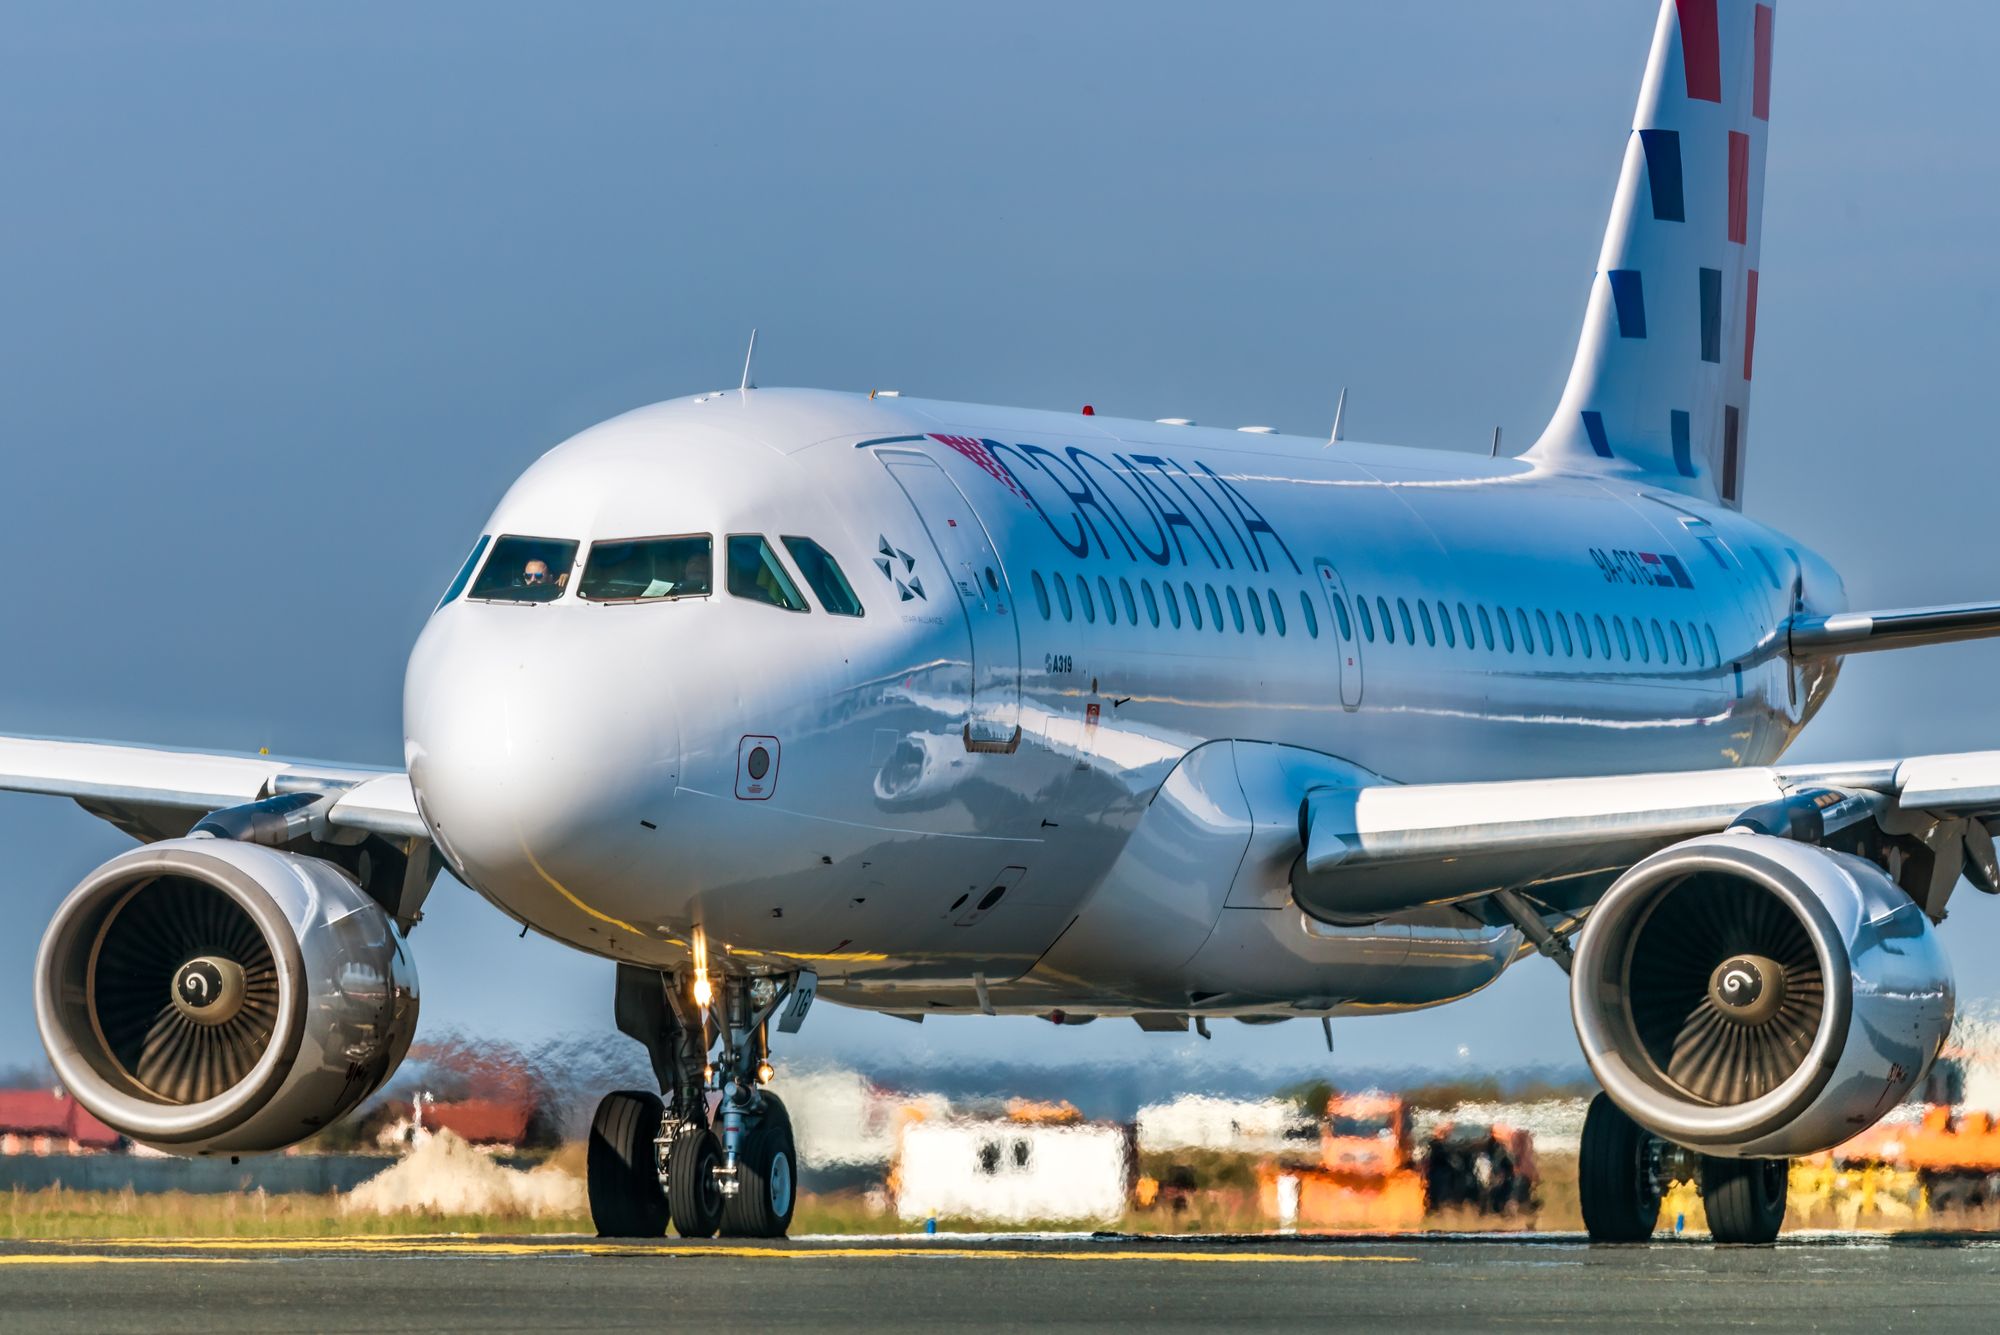 PHOTOS: Croatia Airlines connect Dublin and Zagreb again